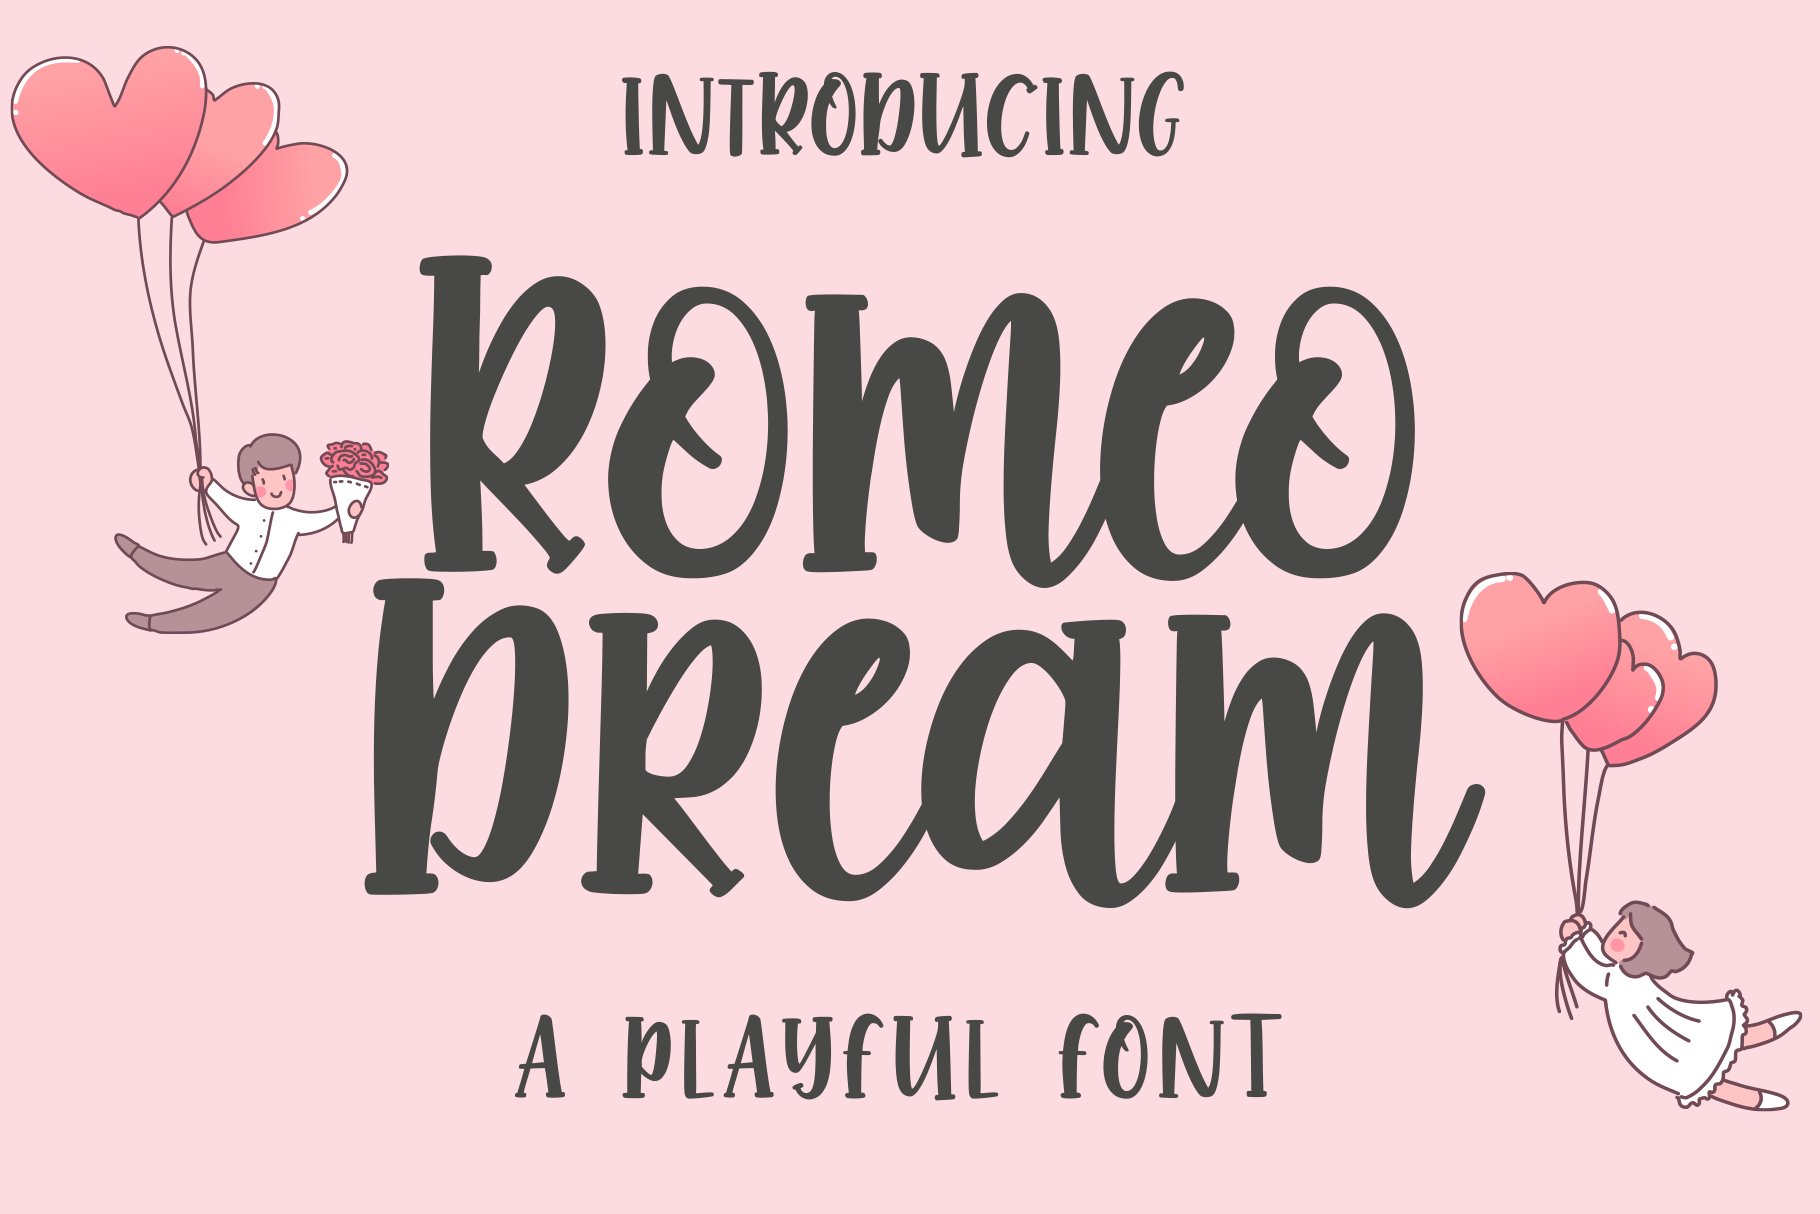 Romeo Dream - Playful Font cover image.